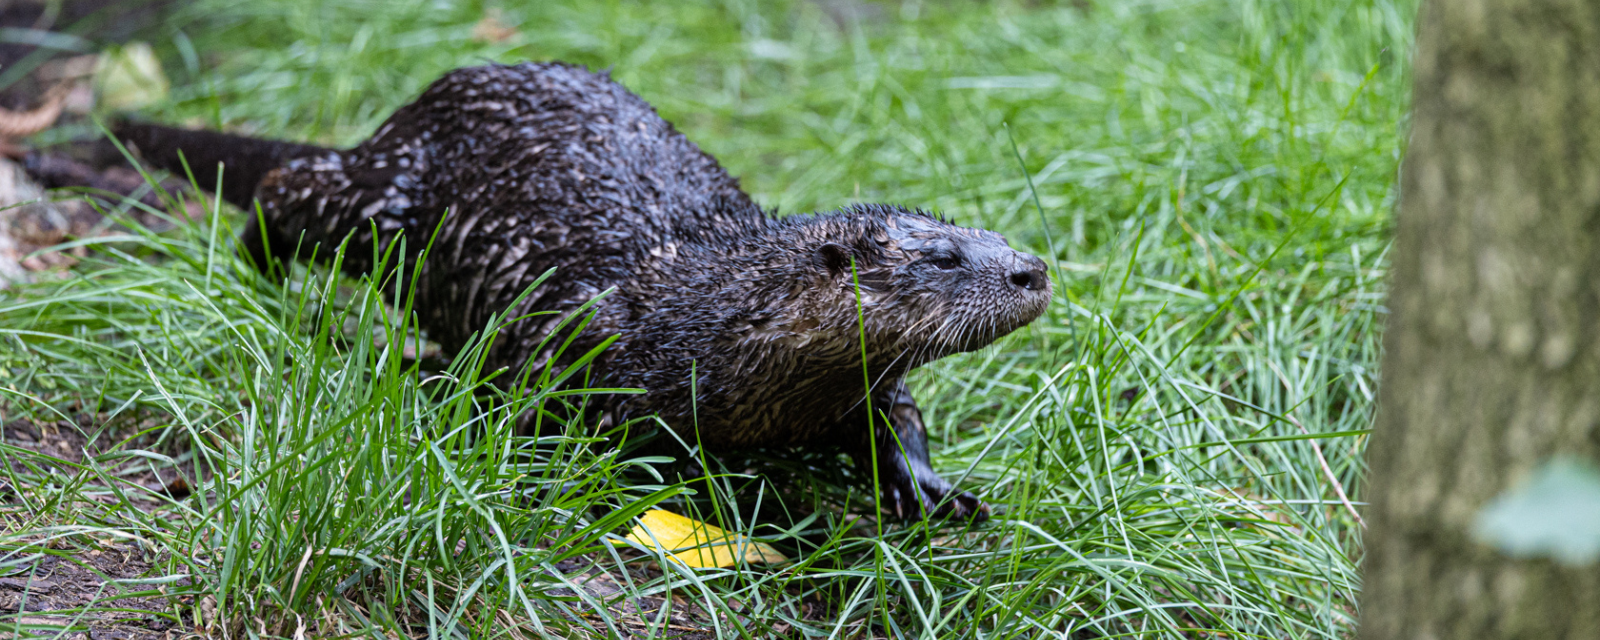 Lincoln Park Zoo Welcomes Two Geriatric North American River Otters